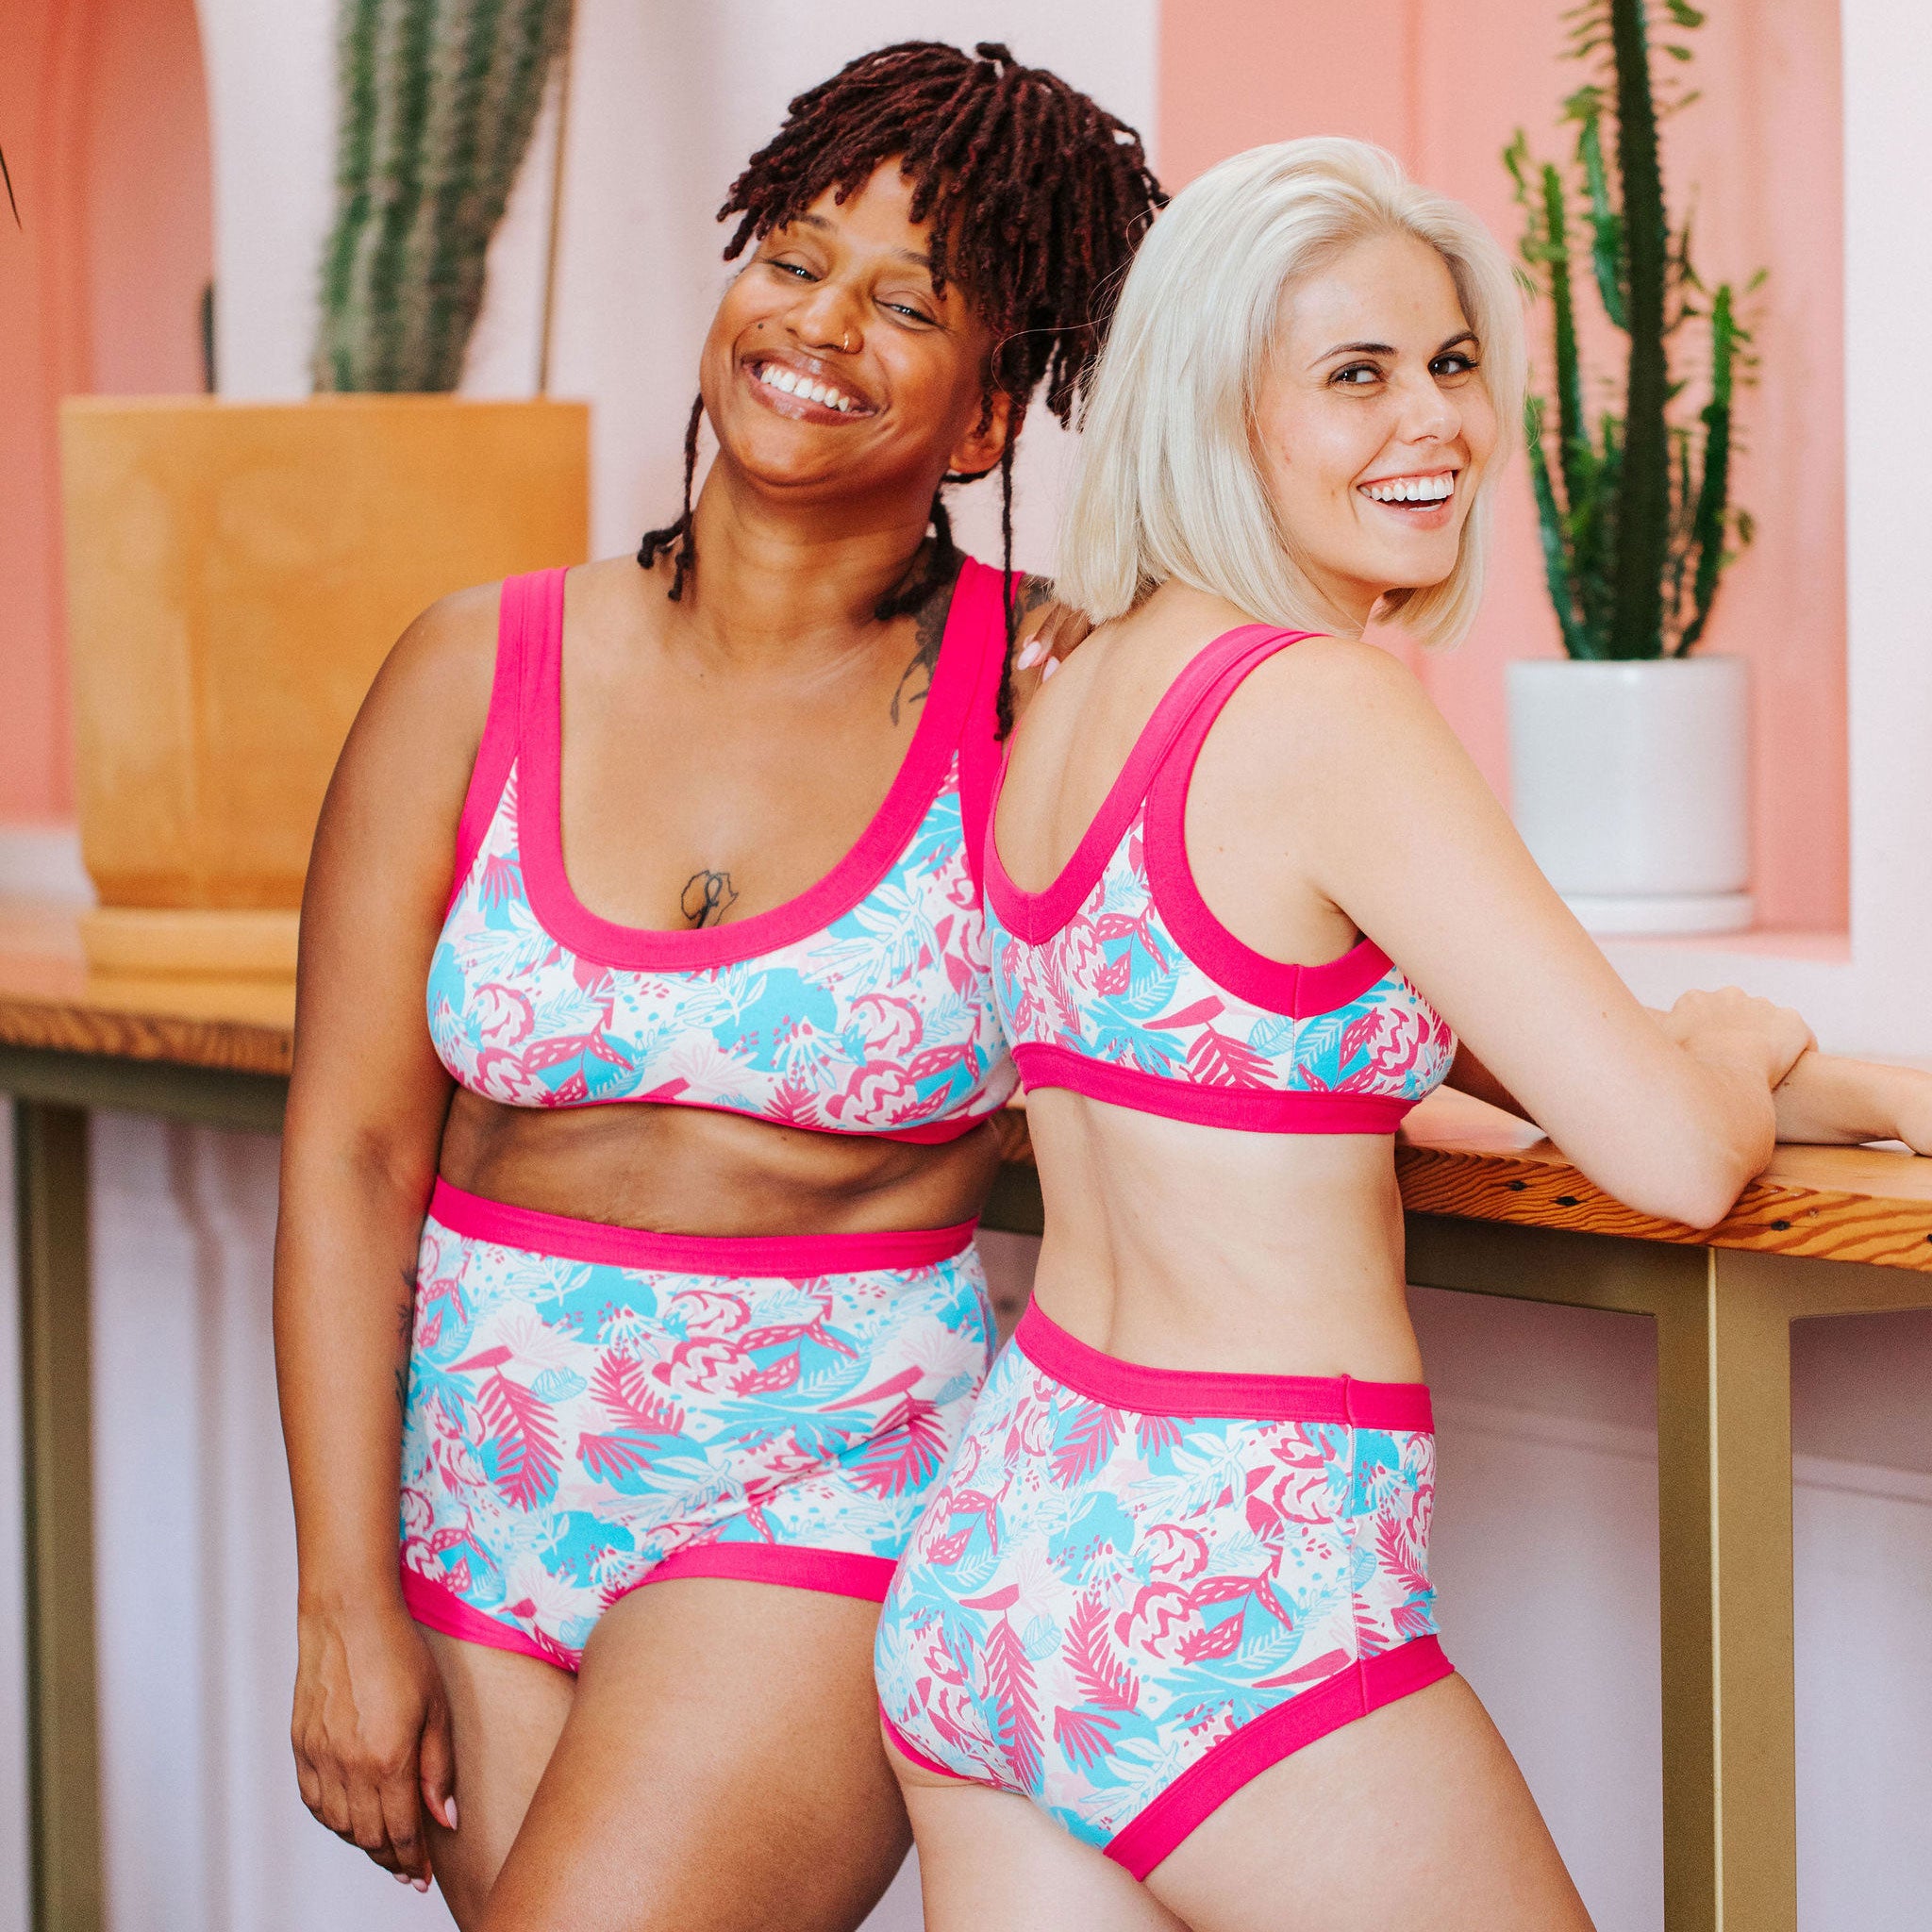 Two models smiling while wearing different styles of Thunderpants in Finding Flamingos print - pink and blue Miami style.